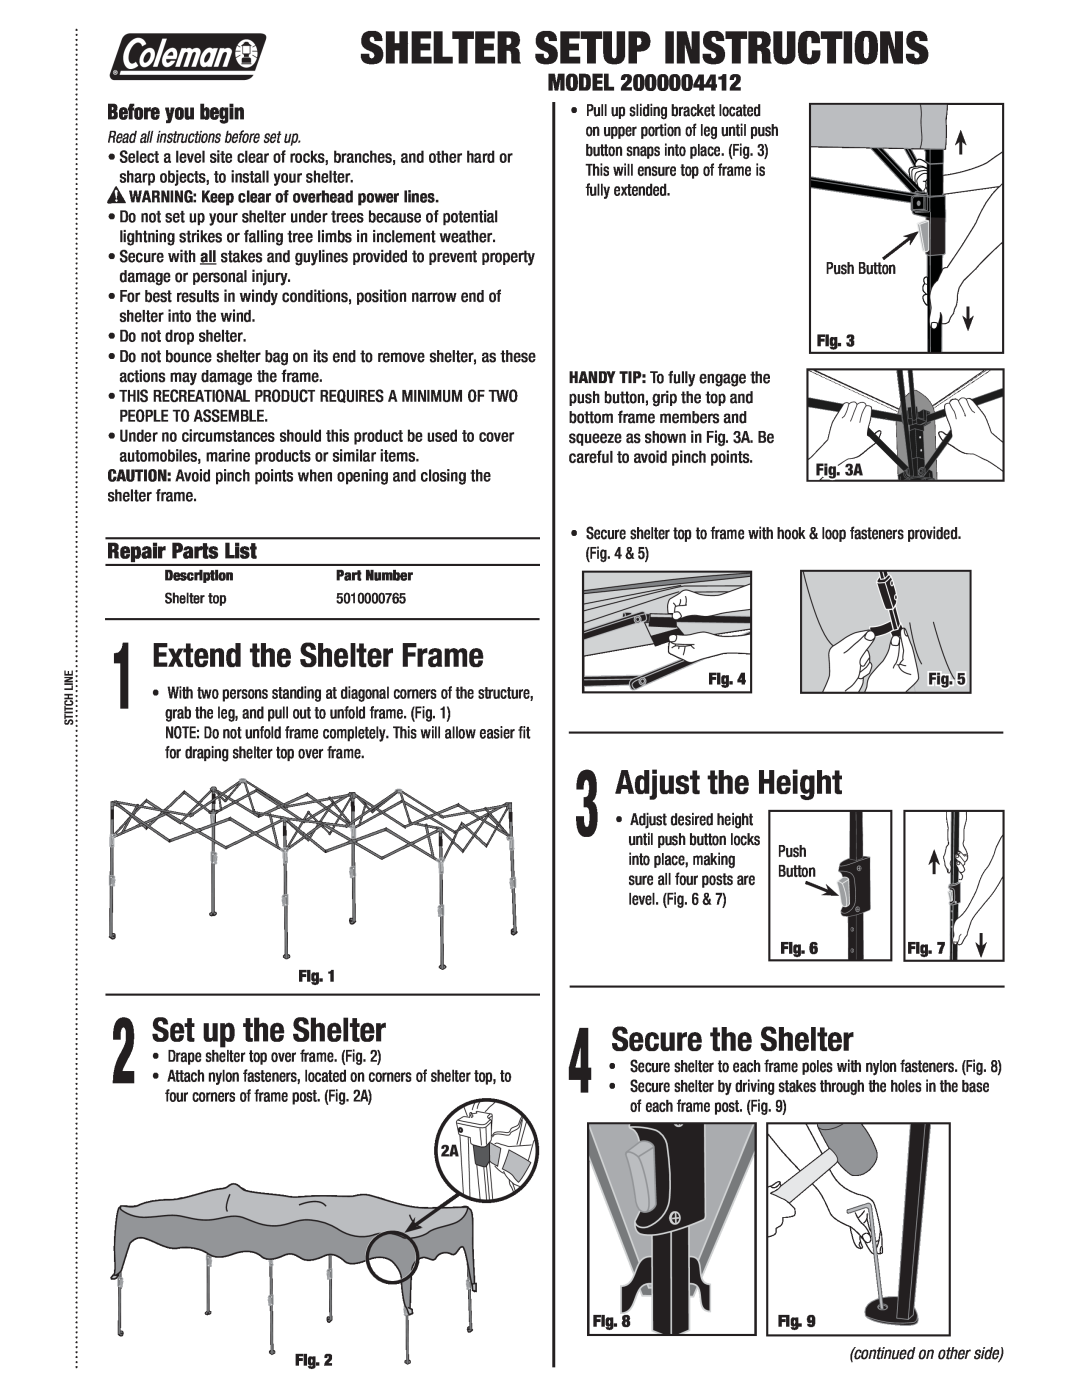 Coleman 2000004412 manual Extend the Shelter Frame, Set up the Shelter, Before you begin, Repair Parts List, 1VTI, #Vuupo 